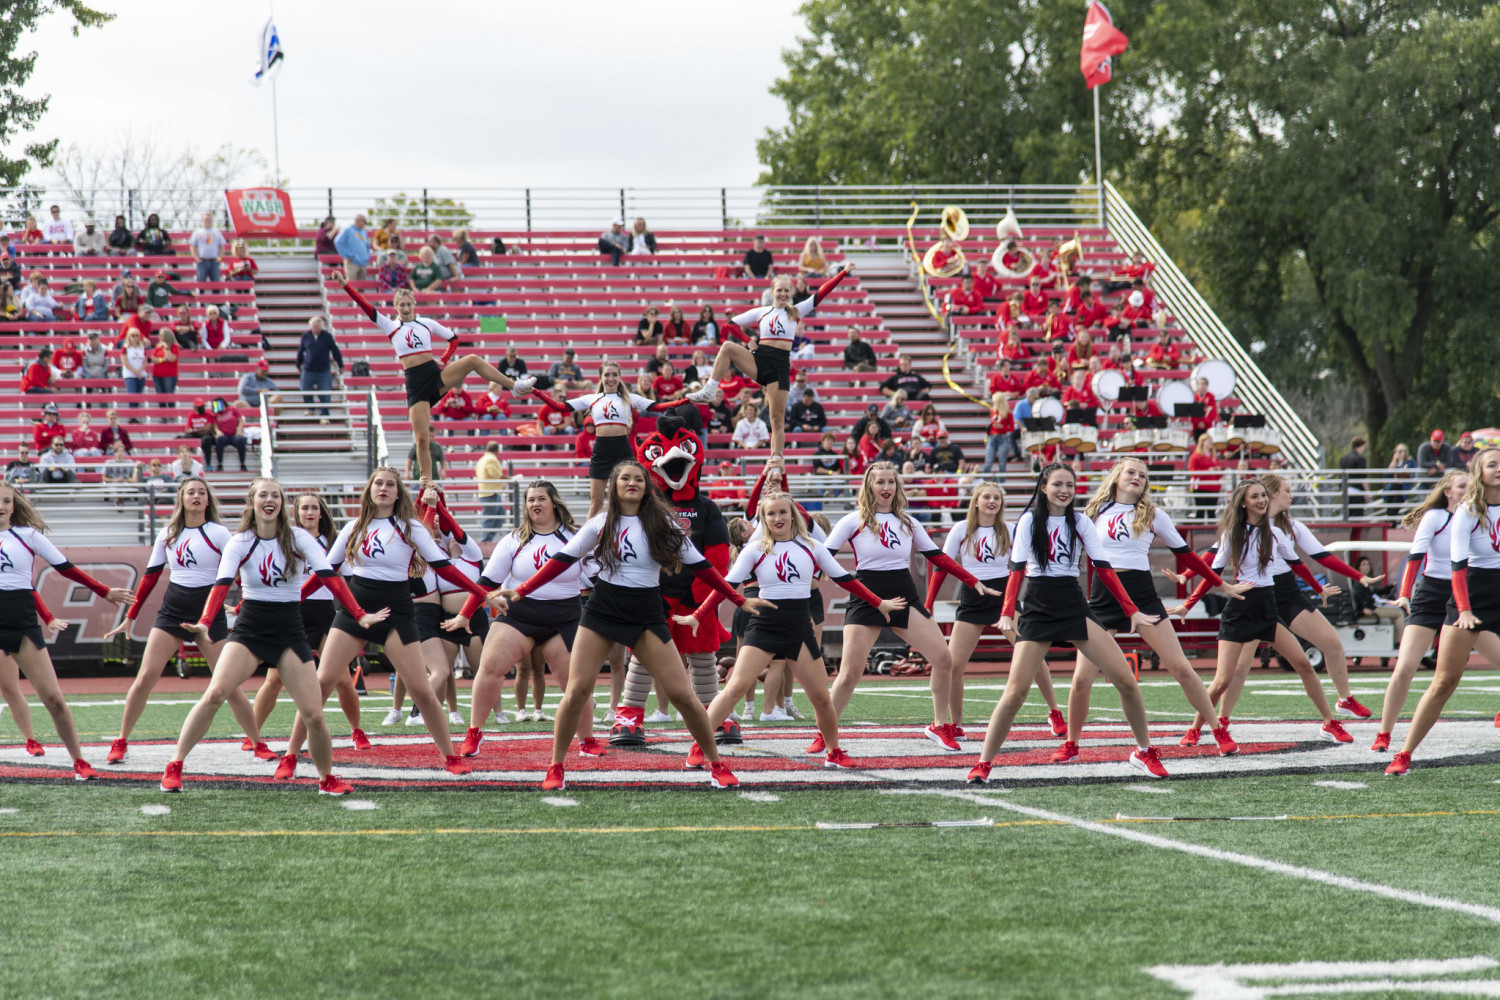 The Carthage Spirit Team performing at the Homecoming football game.